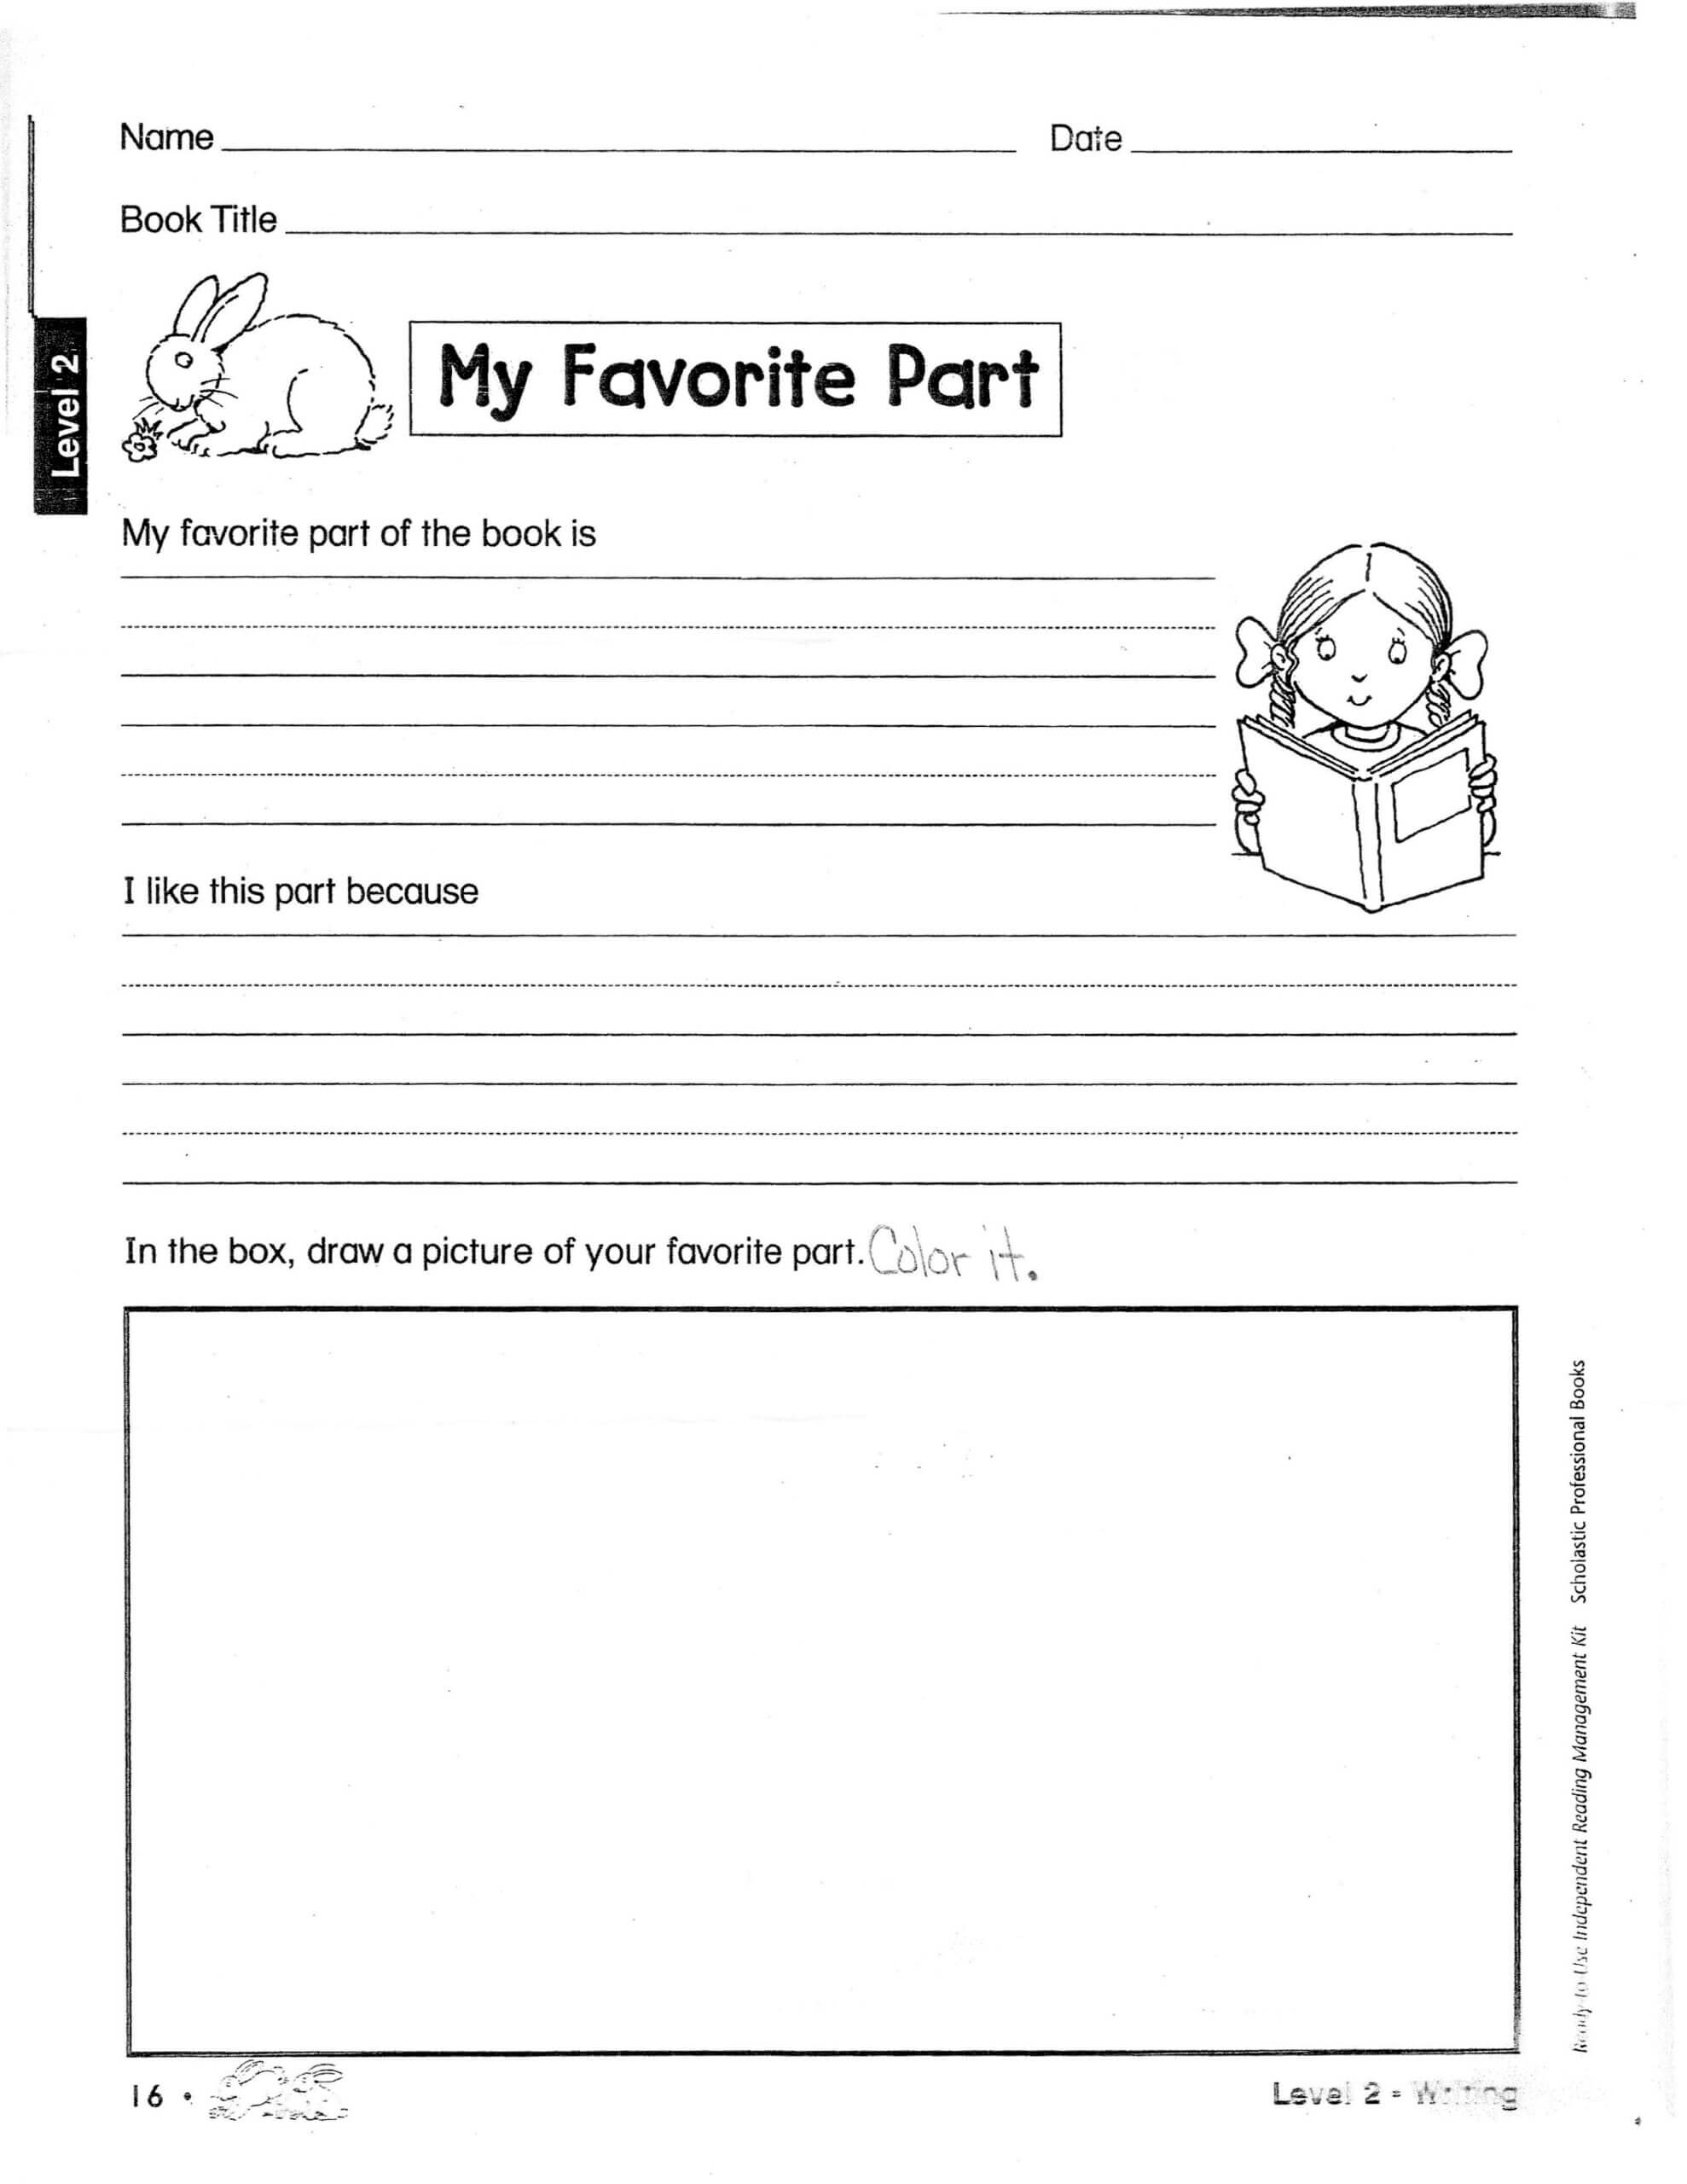 Worksheet For Book Report | Printable Worksheets And Inside 2Nd Grade Book Report Template